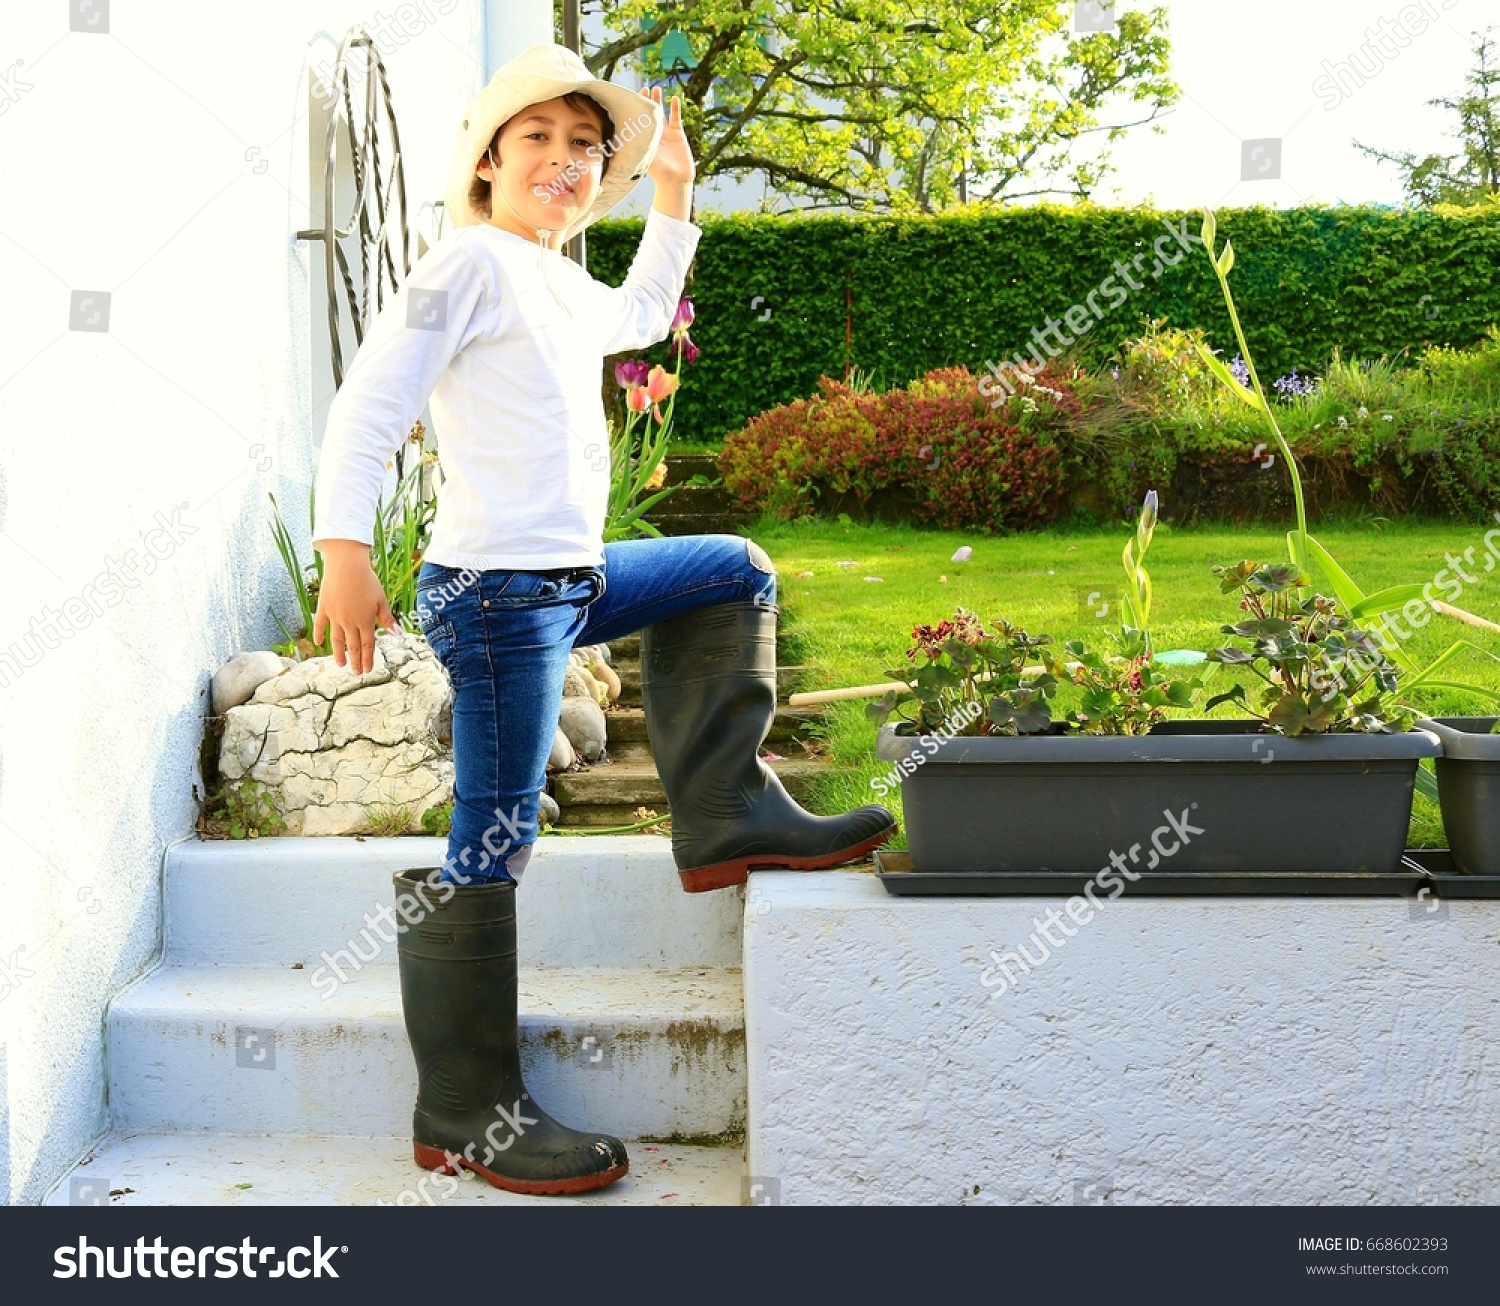 boy in boots